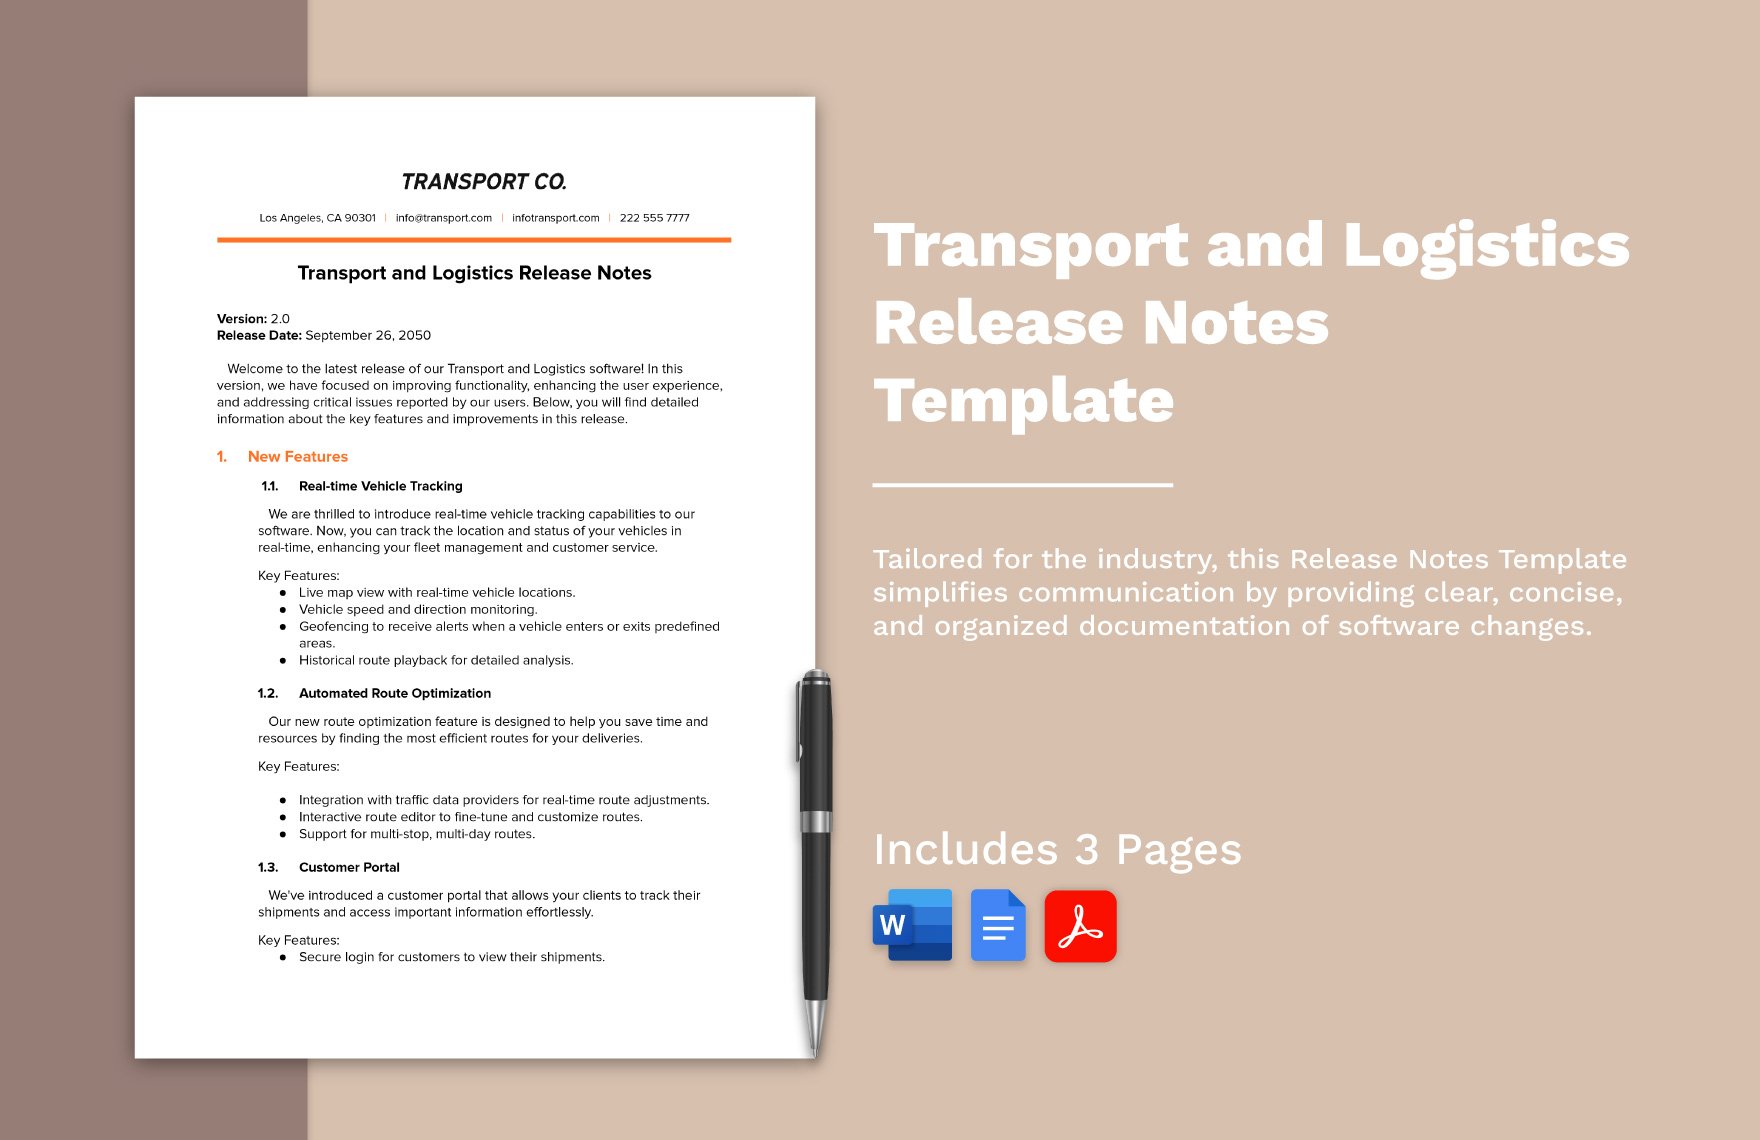 Transport and Logistics Release Notes Template